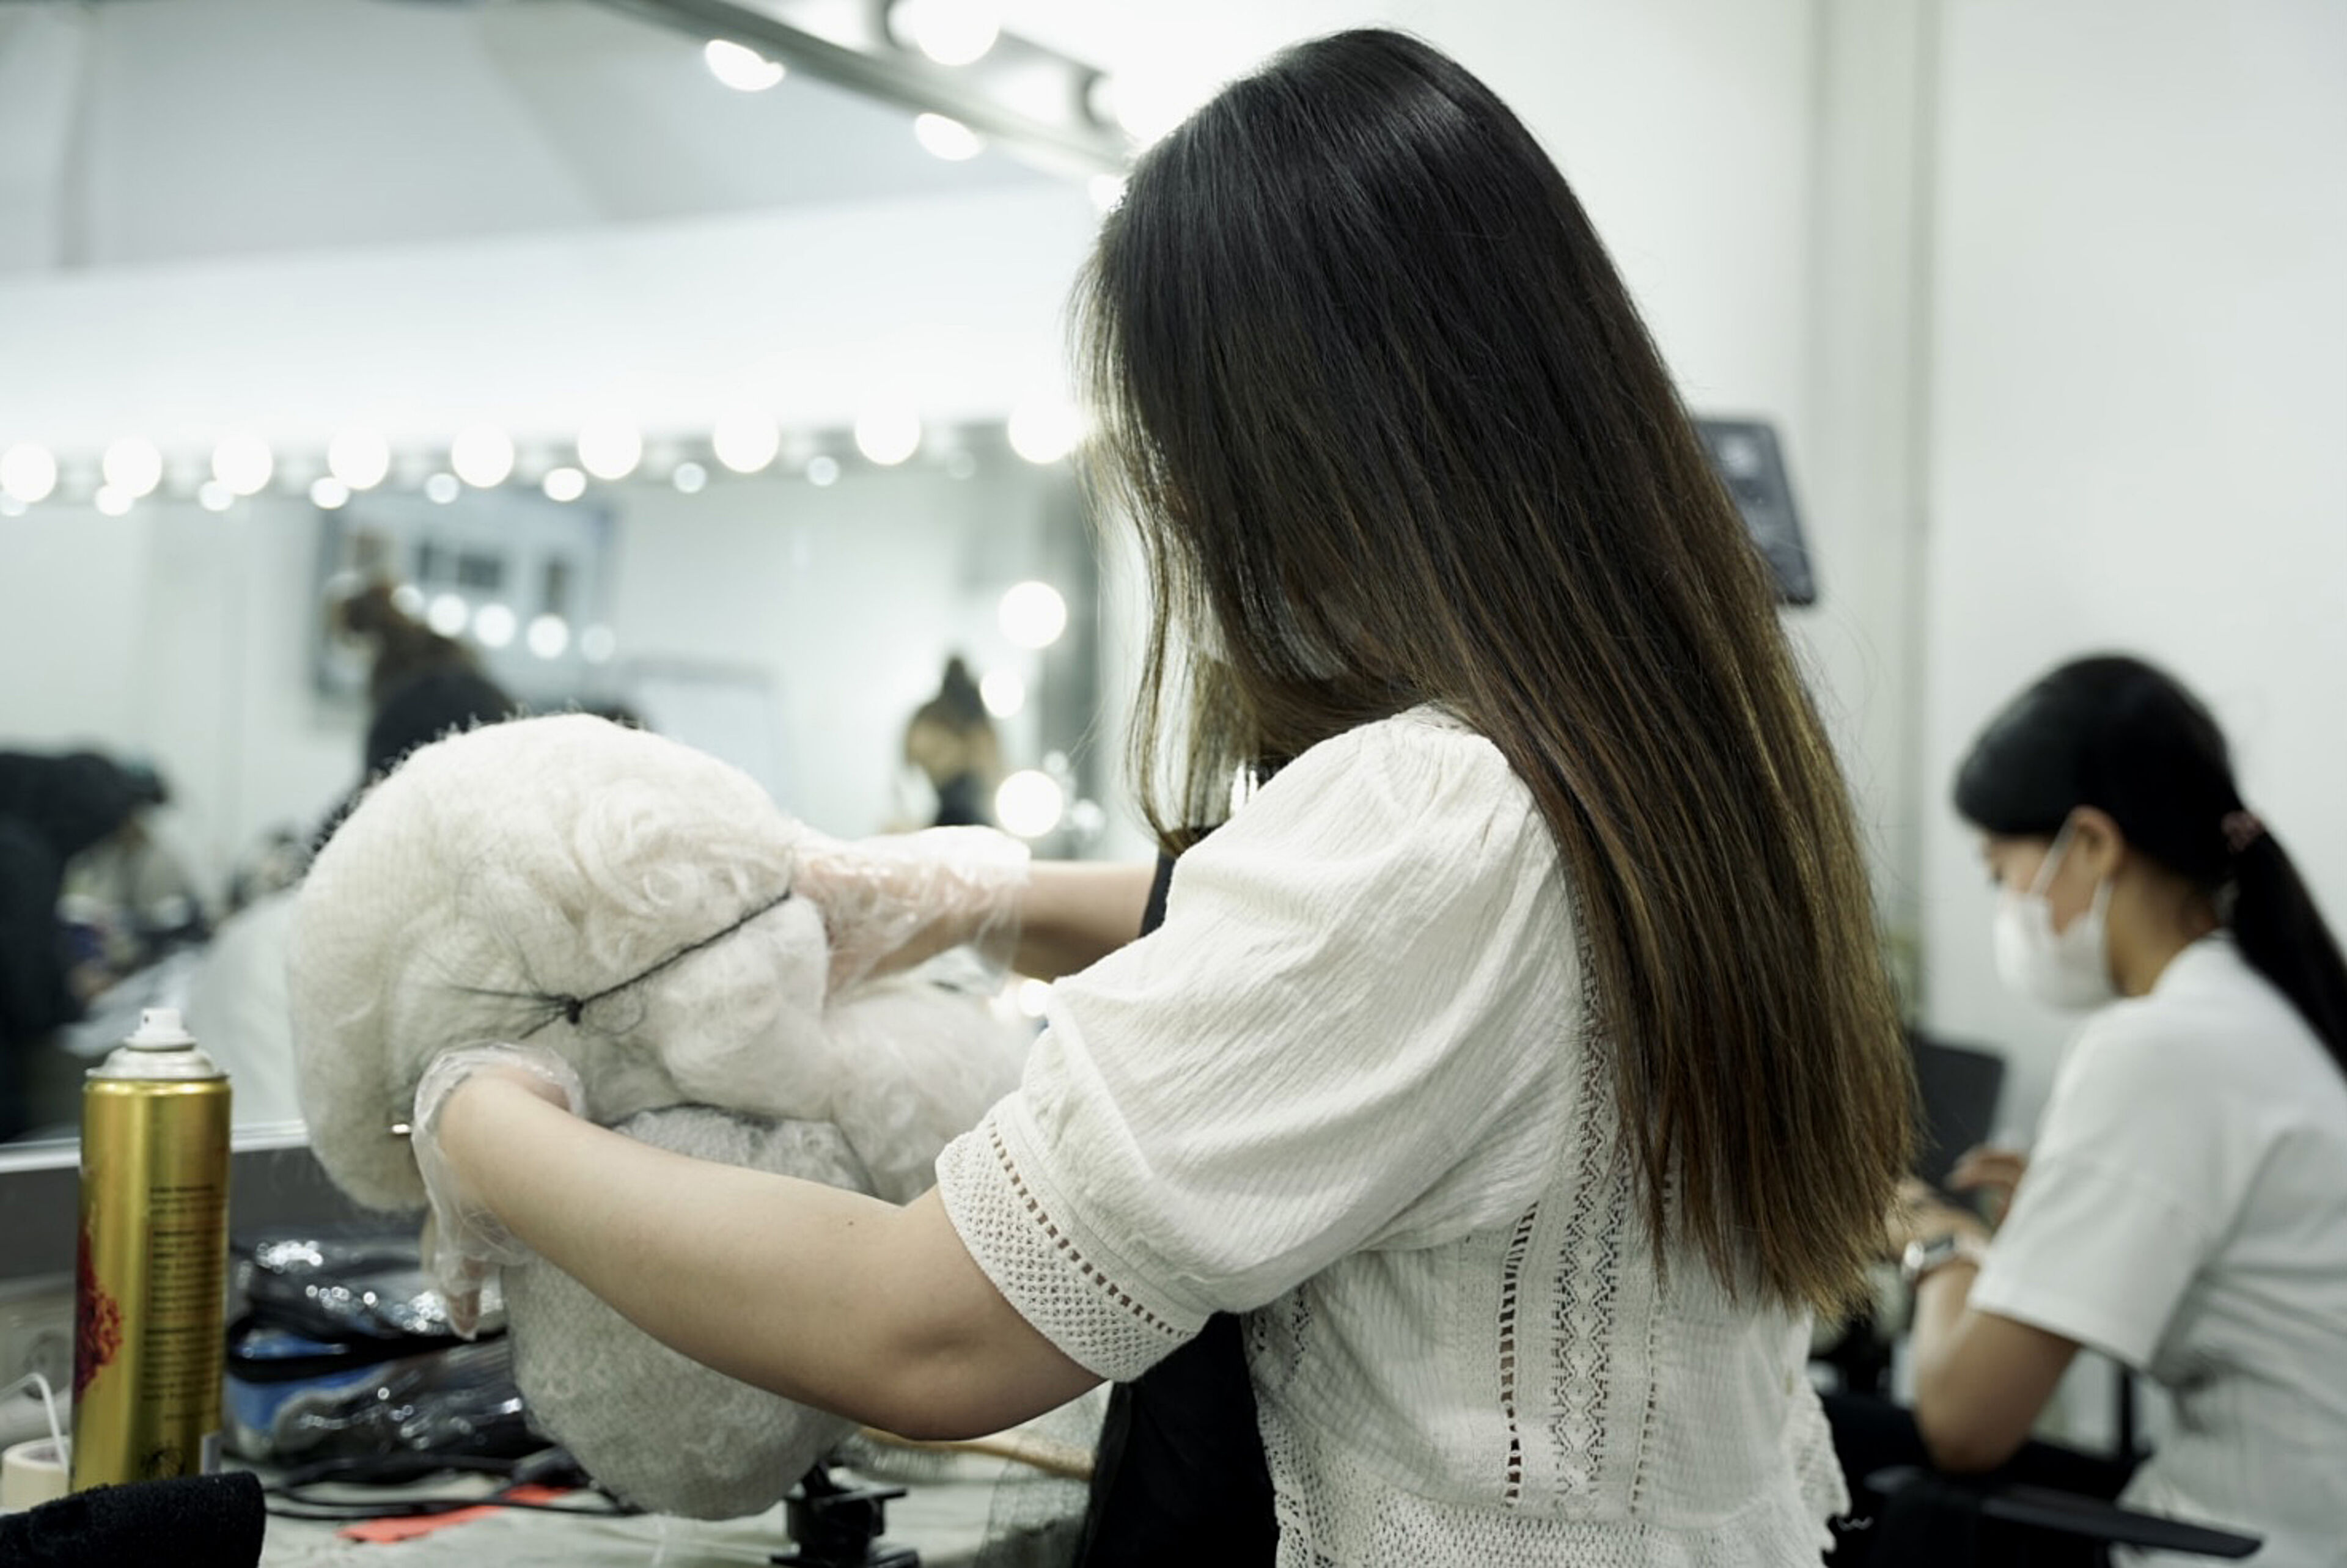 A focused hairstylist secures a voluminous wig on a stand, preparing it for styling in a salon setting.